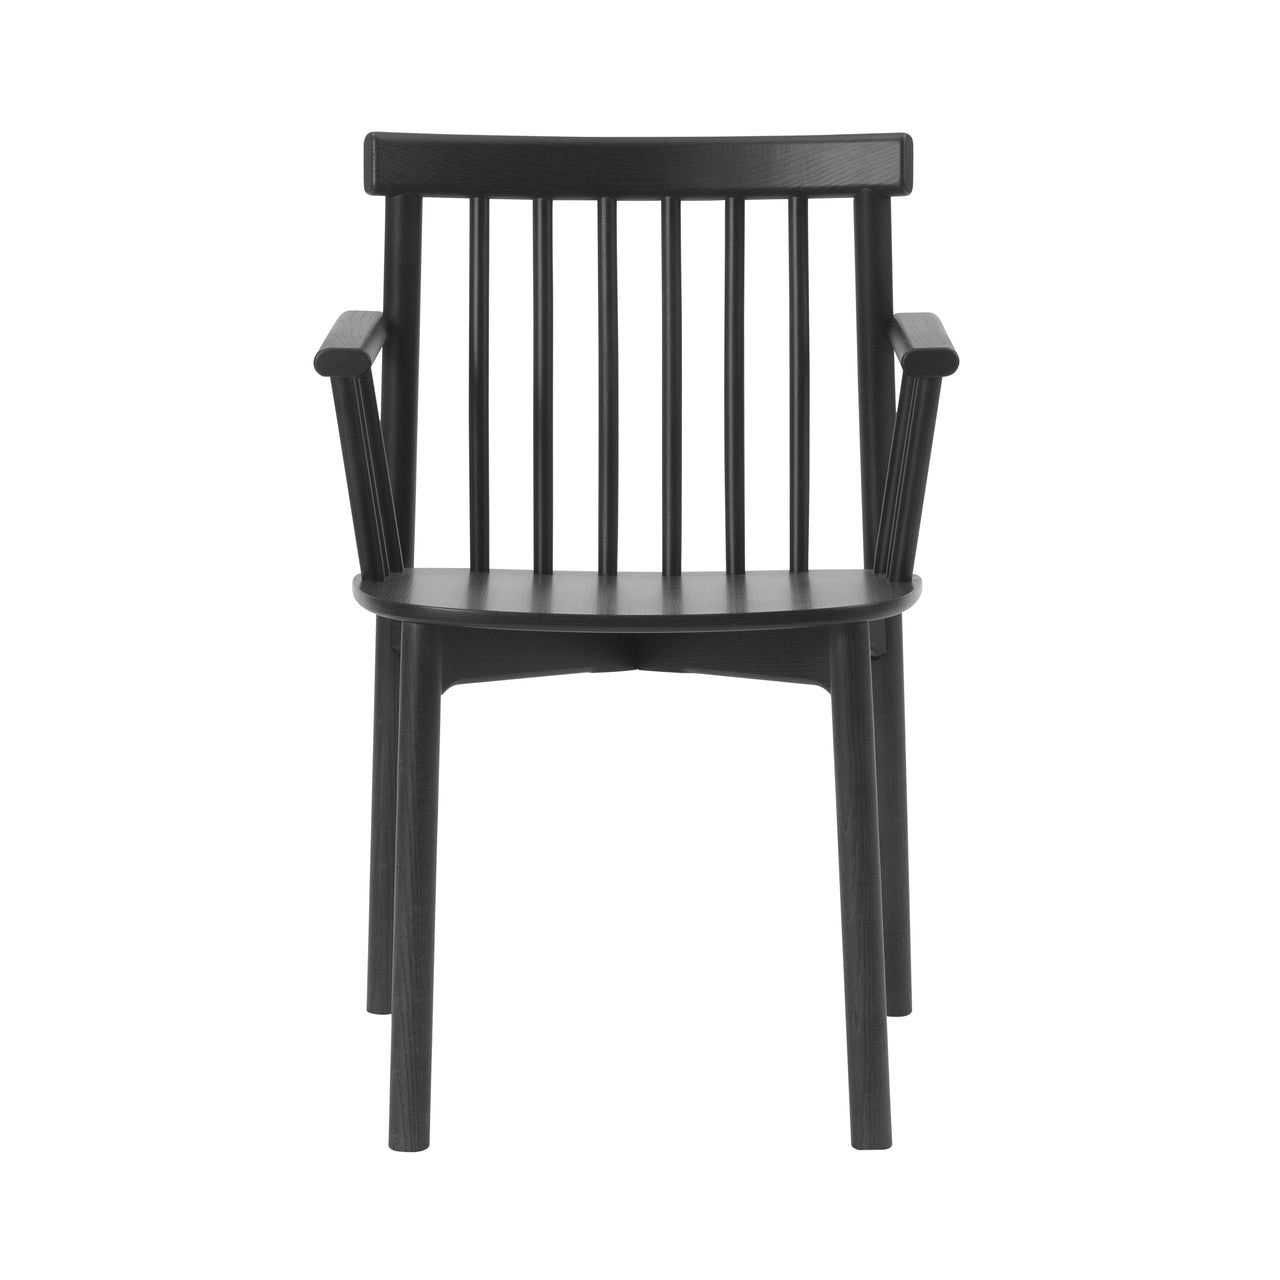 Pind Chair: With Arm + Black Stained Ash